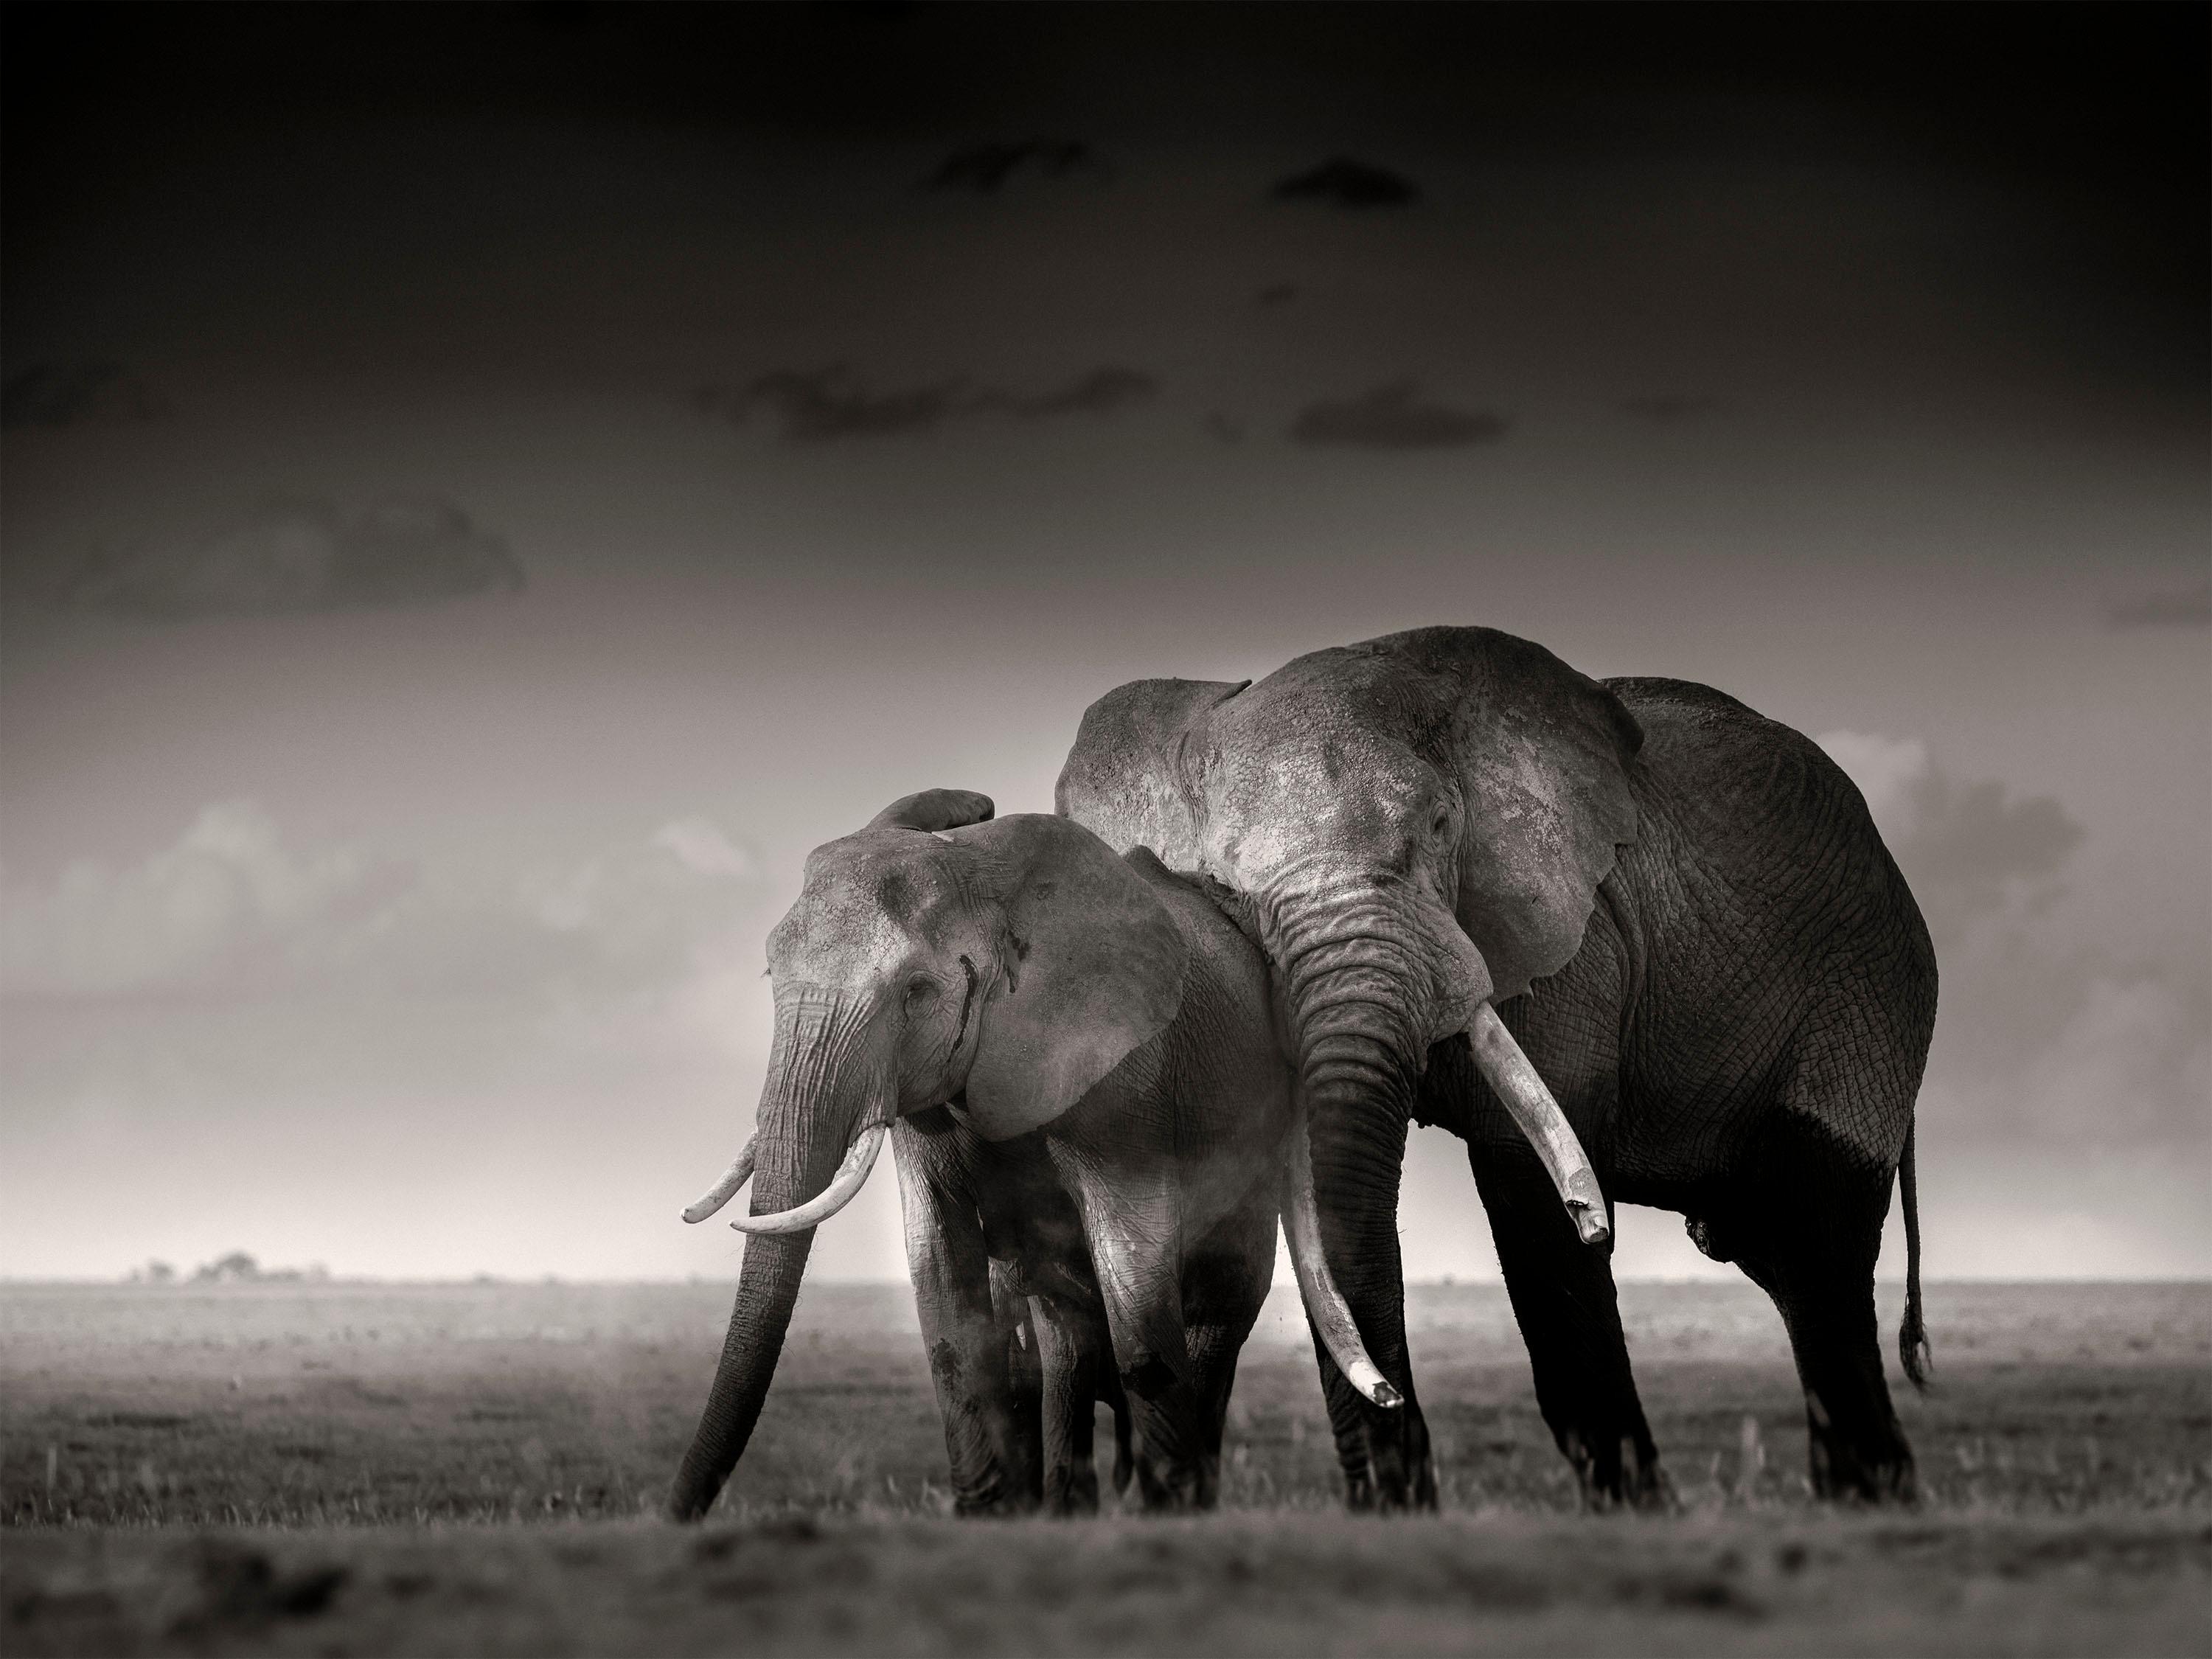 Joachim Schmeisser Landscape Photograph - Primo with young Girl, Kenya, Elephant, wildlife, b&w photography